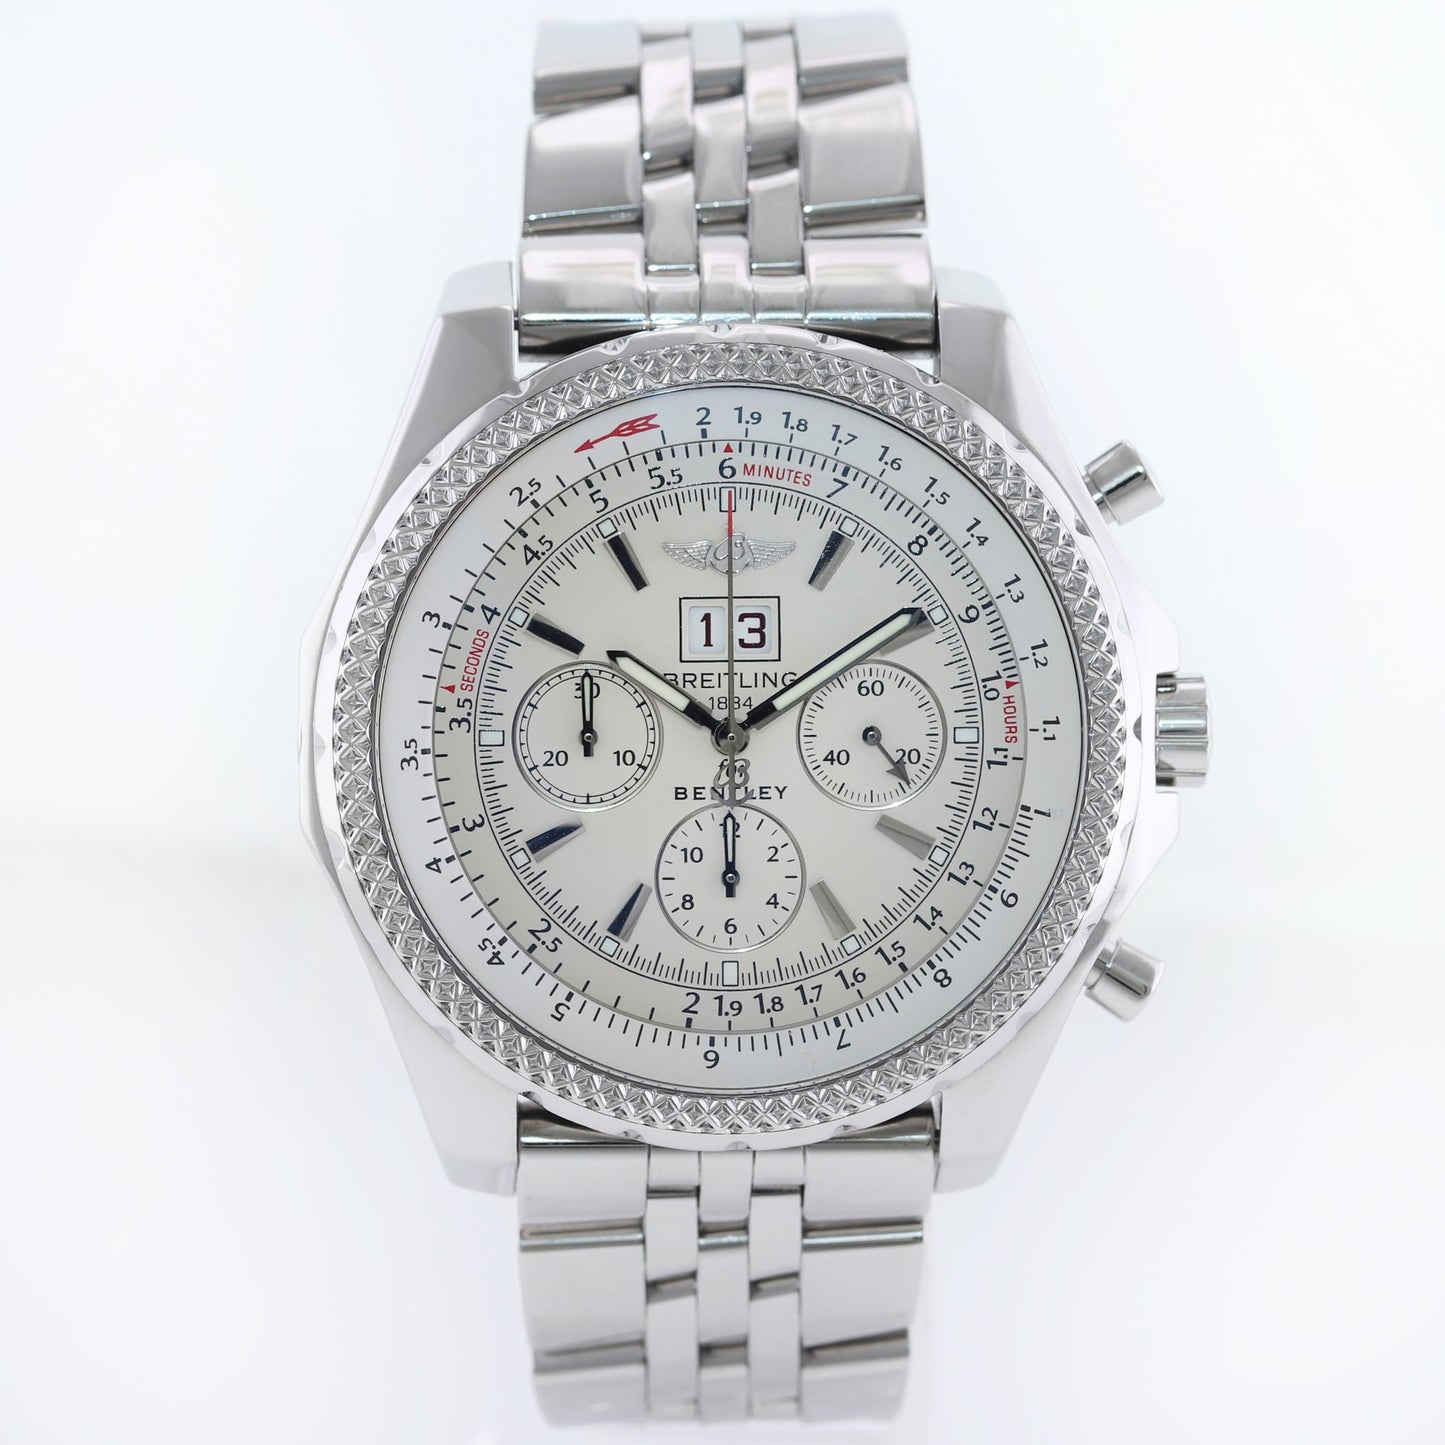 Breitling Bentley 6.75 Chronograph Silver Automatic Steel A44362 48.7mm Watch